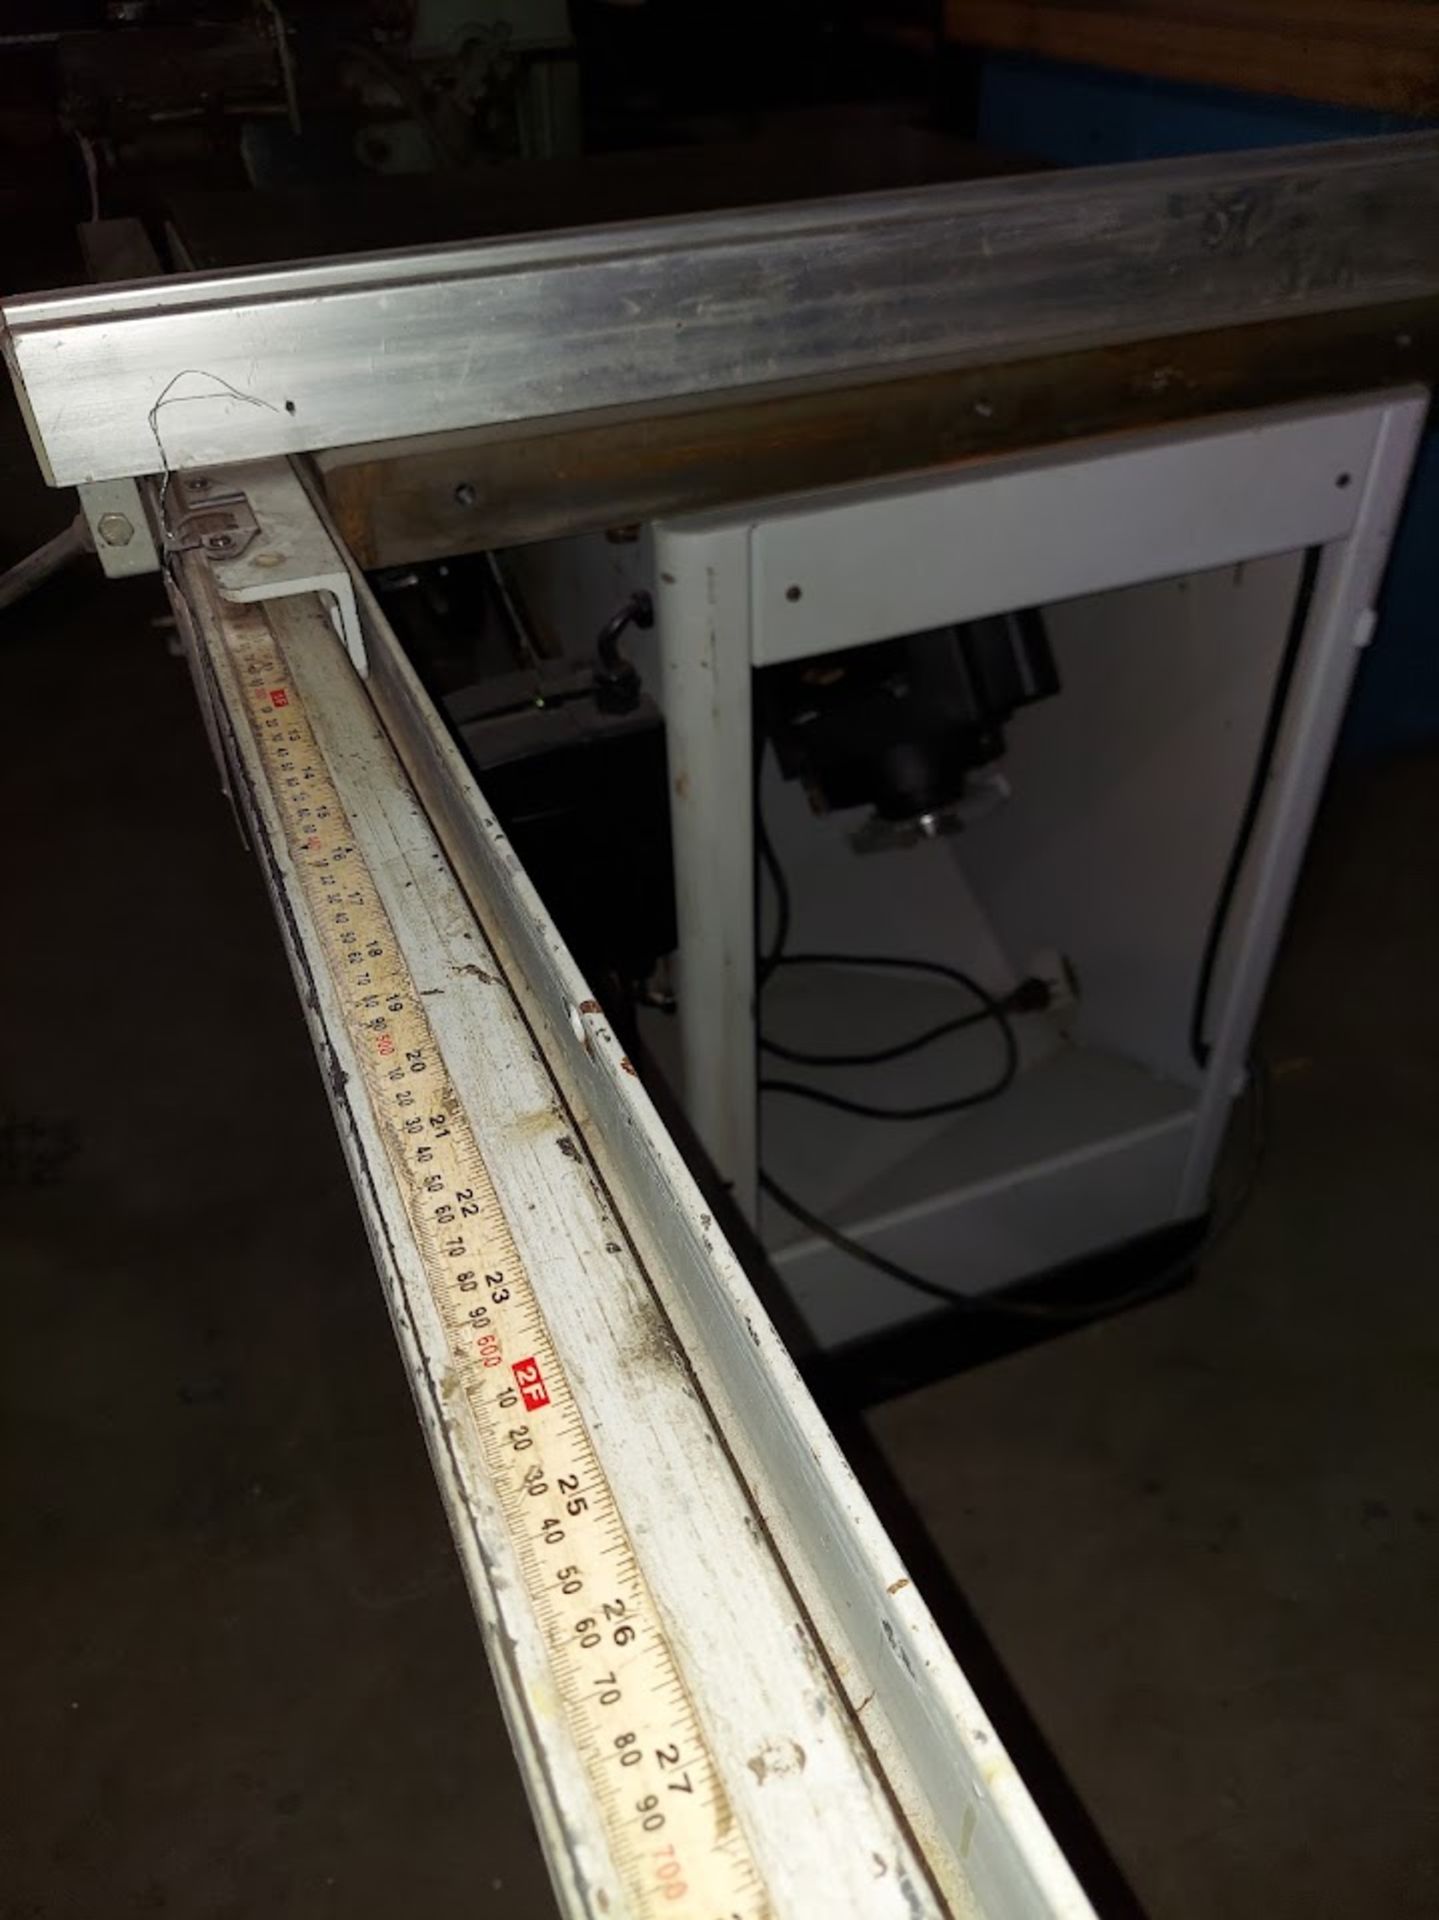 Delta Industrial 10" Cabinet Table Saw, Model #36-729, T-Square Fence & 51" Rail, Motor is 15 Amp - Image 3 of 3